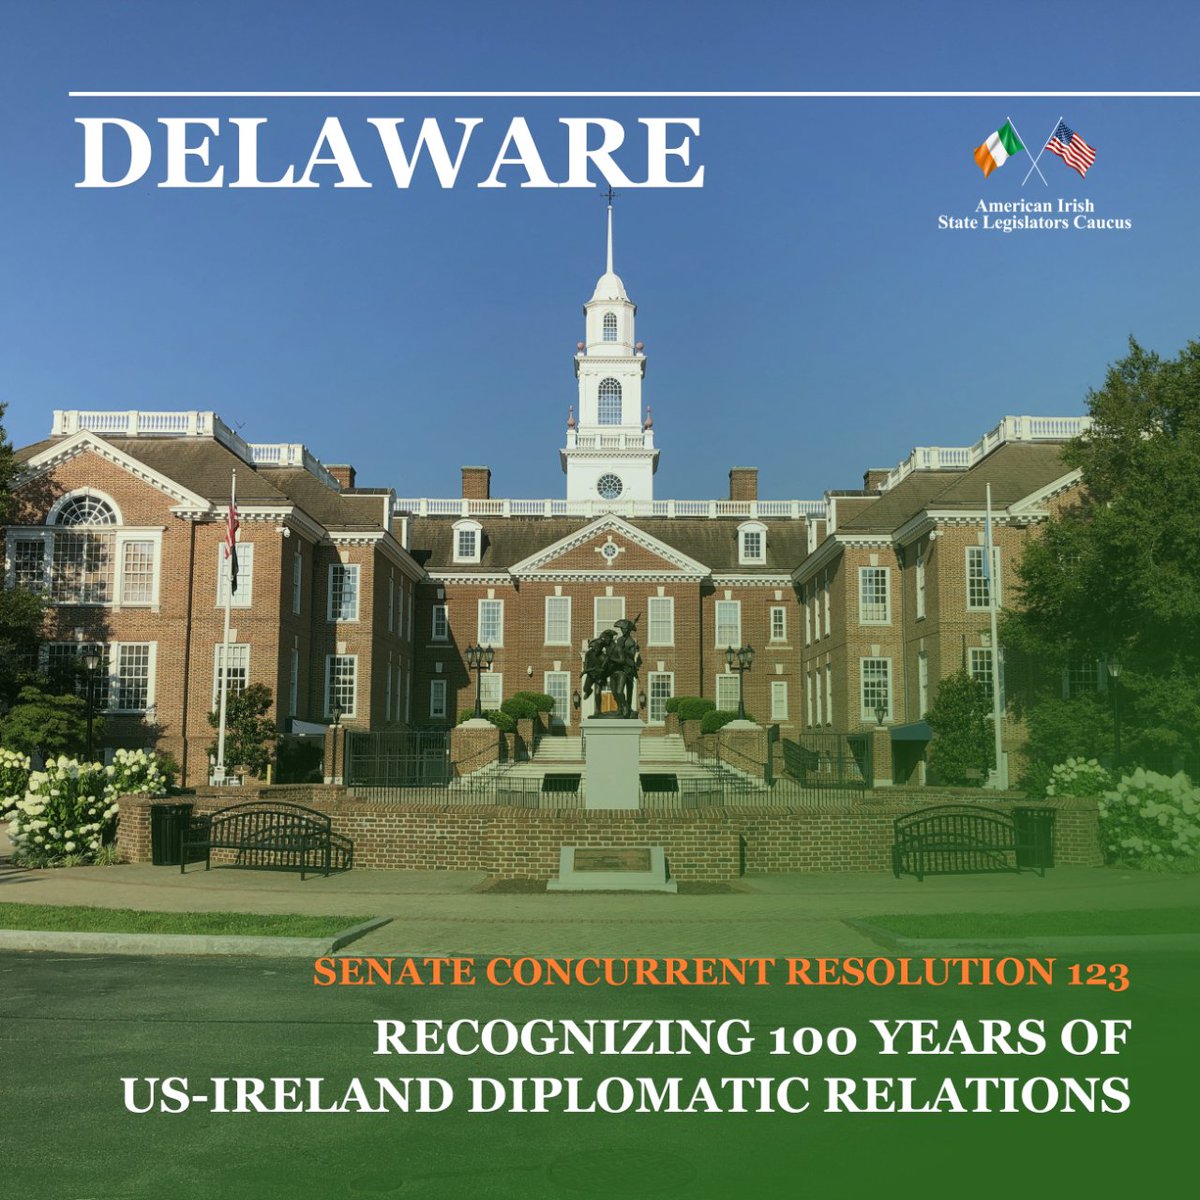 Commemorating 100 years of diplomatic relations between Ireland & the US in Delaware.

The Delaware Senate introduced a concurrent resolution recognizing this milestone and the role of the US in the Good Friday Agreement.

#AISLC #AmericanIrish #LeChéile100